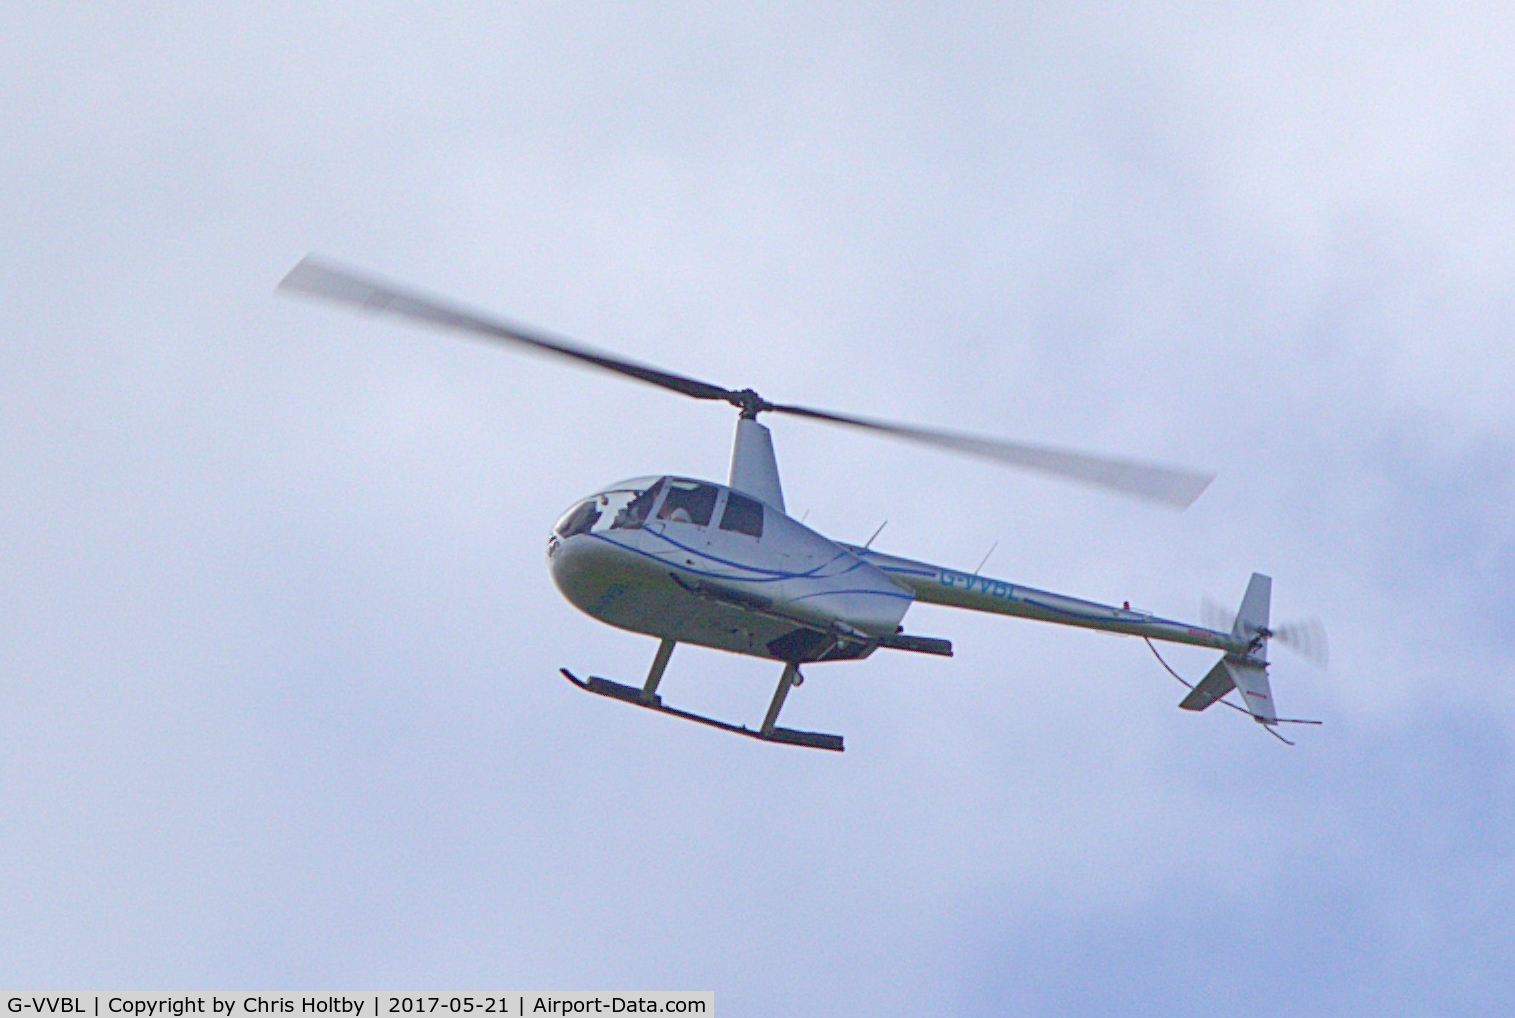 G-VVBL, 2006 Robinson R44 Raven II C/N 11606, Over Waltham Abbey in new livery